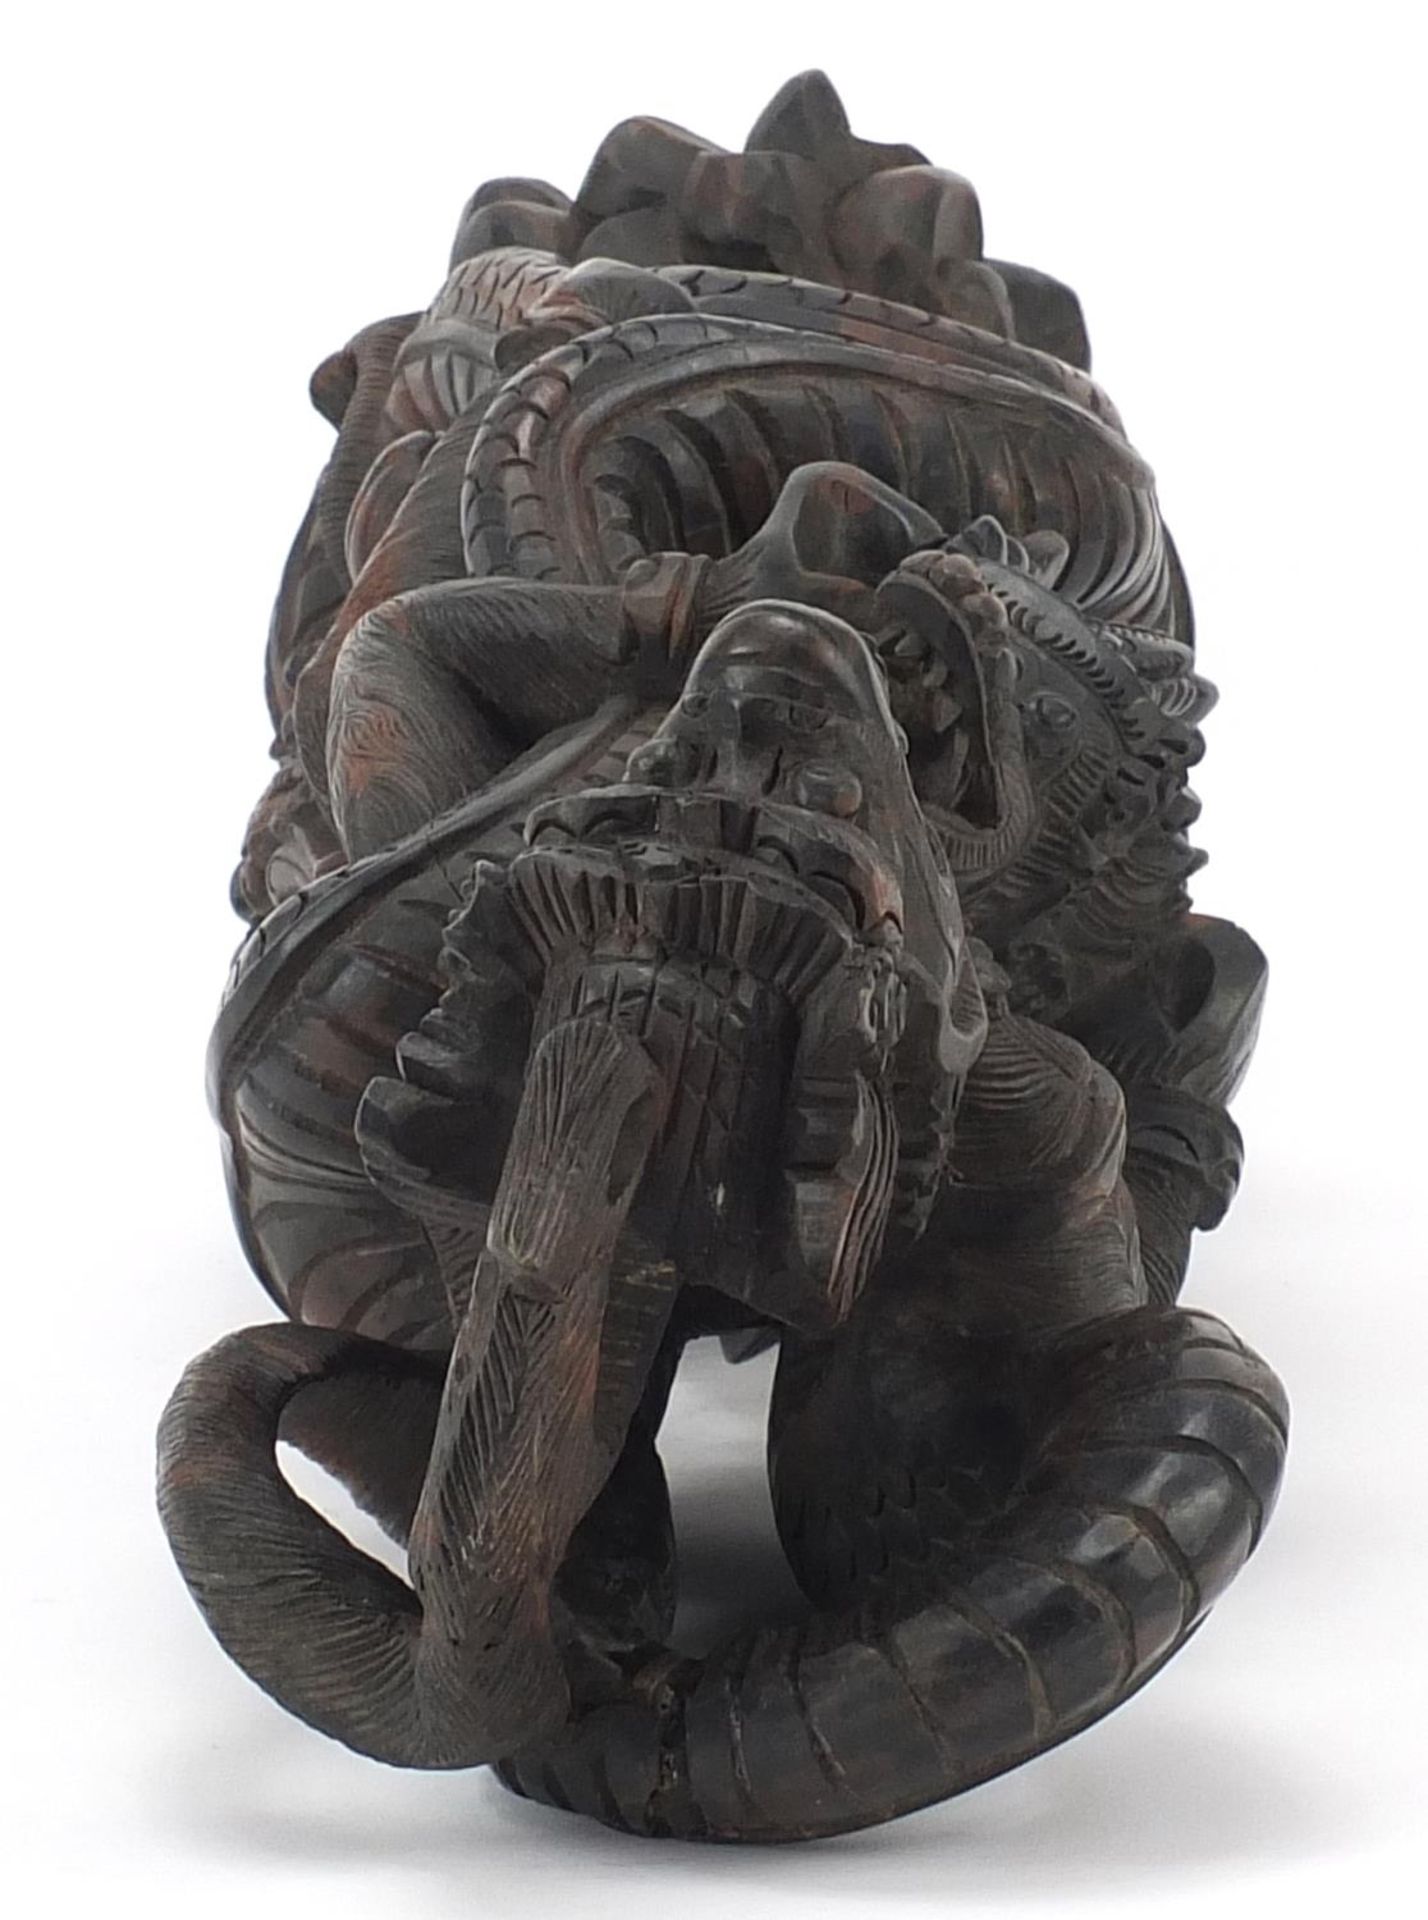 Large Balinese wooden carving of two dragons, 47cm high - Image 7 of 8